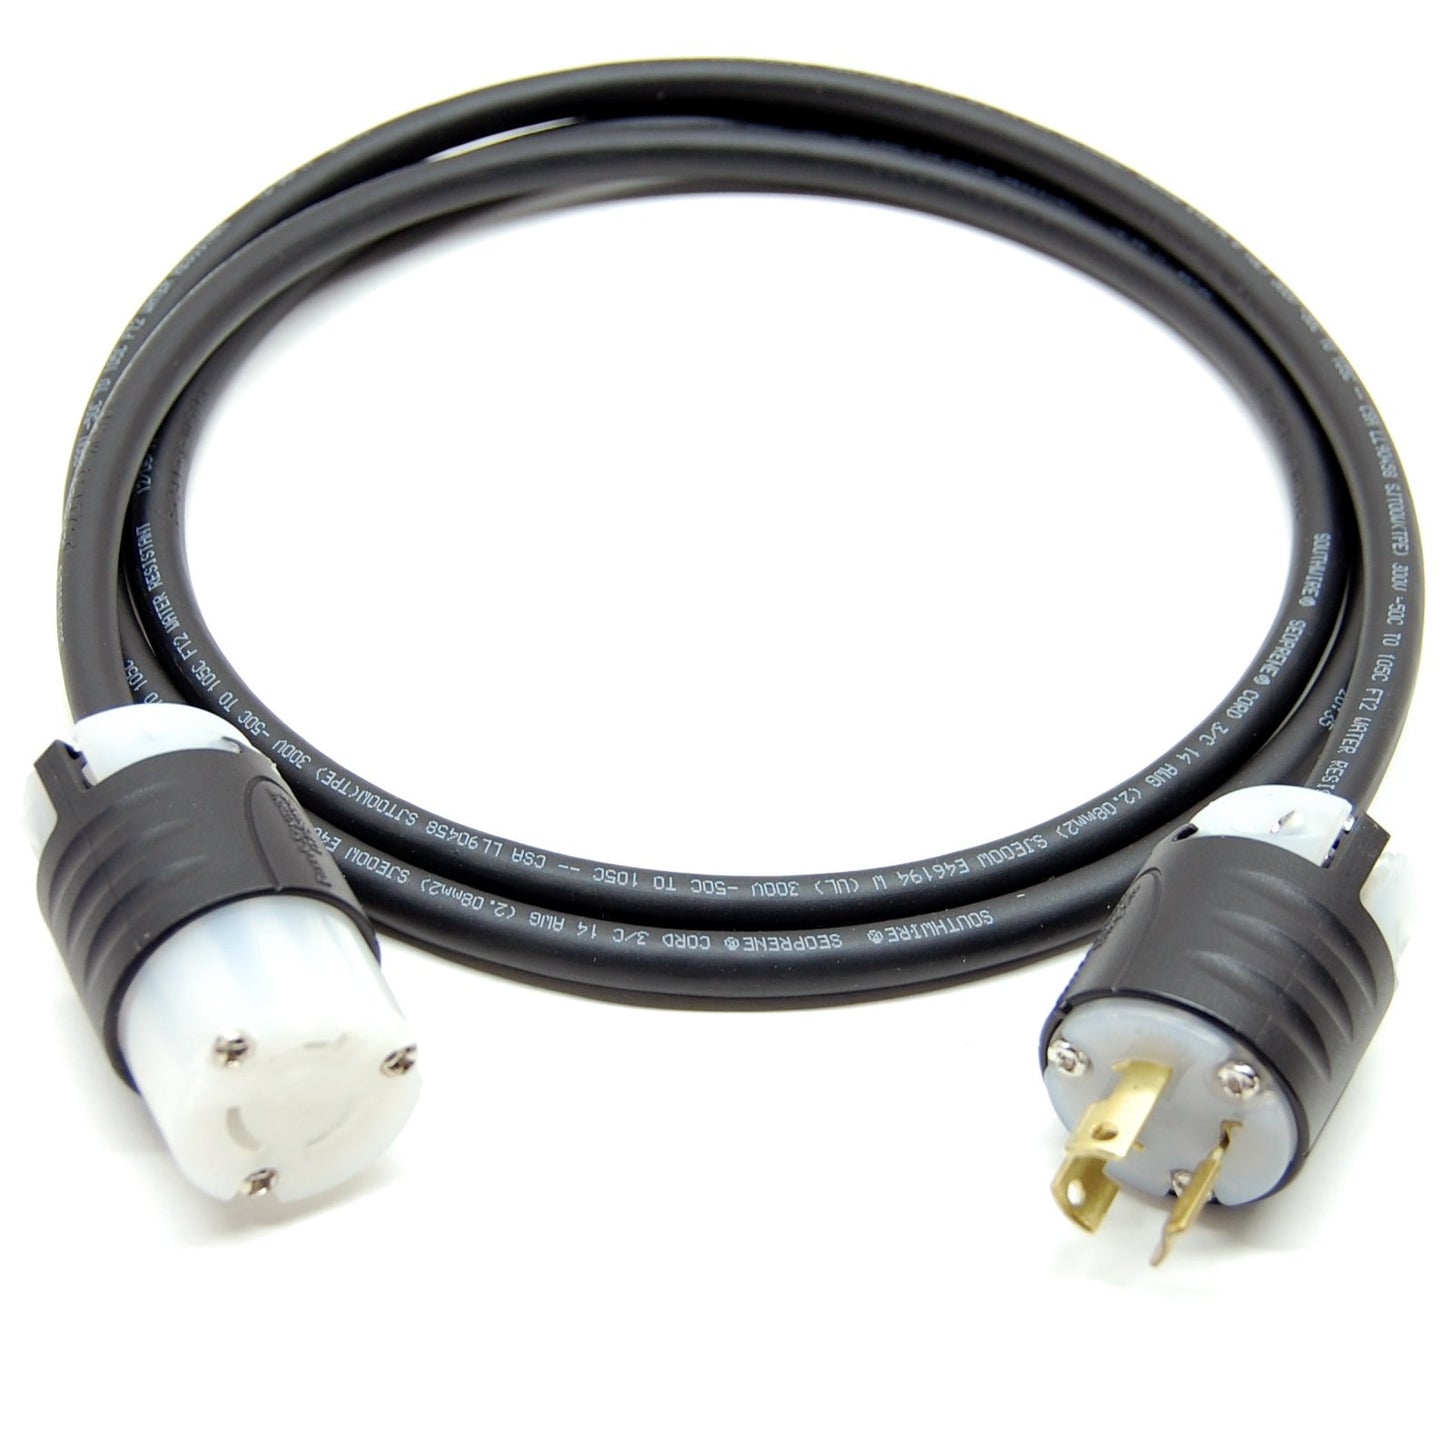 Nanolux Cord Connector with twist lock, 240v 6'